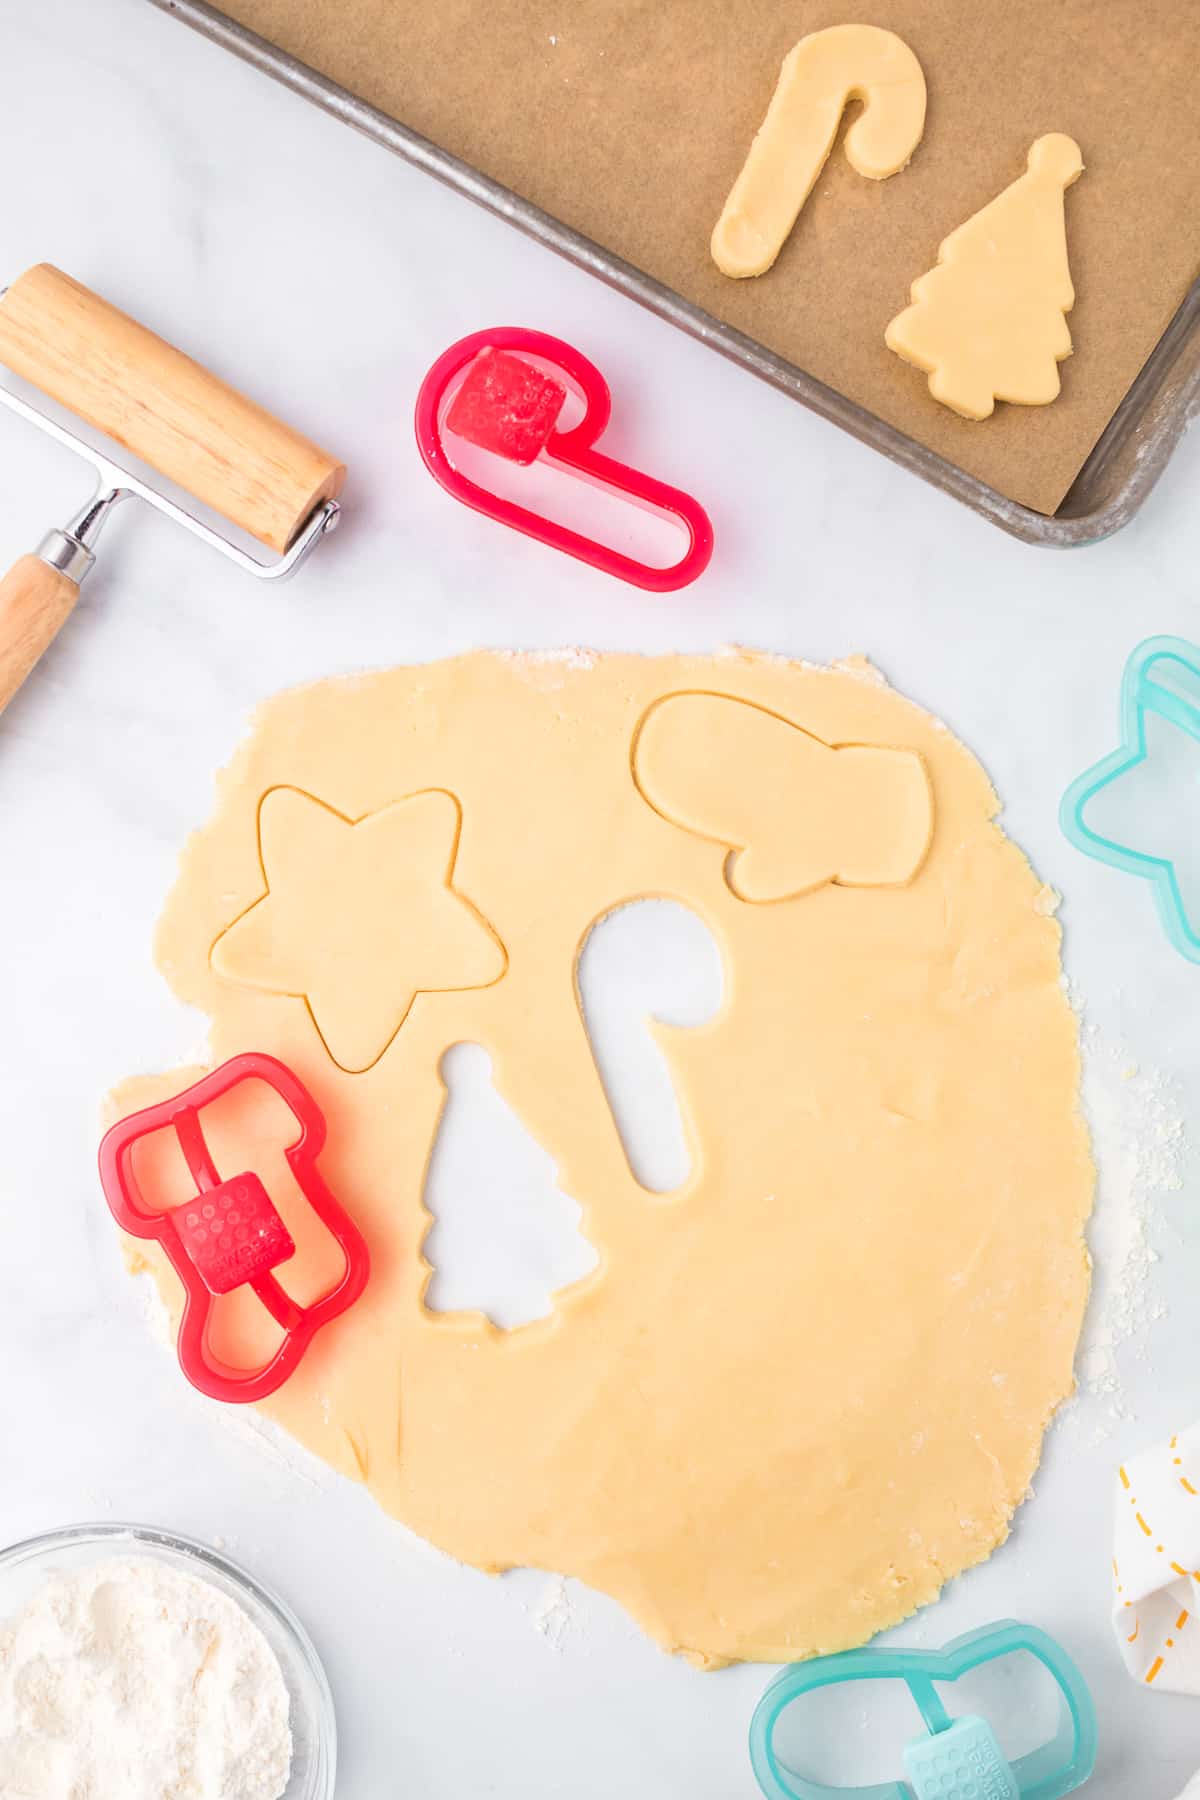 Sugar cookie dough rolled out on a counter from overhead being cut out with cookie cutters while a pan with some cookies, a bowl of flour, and a rolling pin sit nearby on the counter.